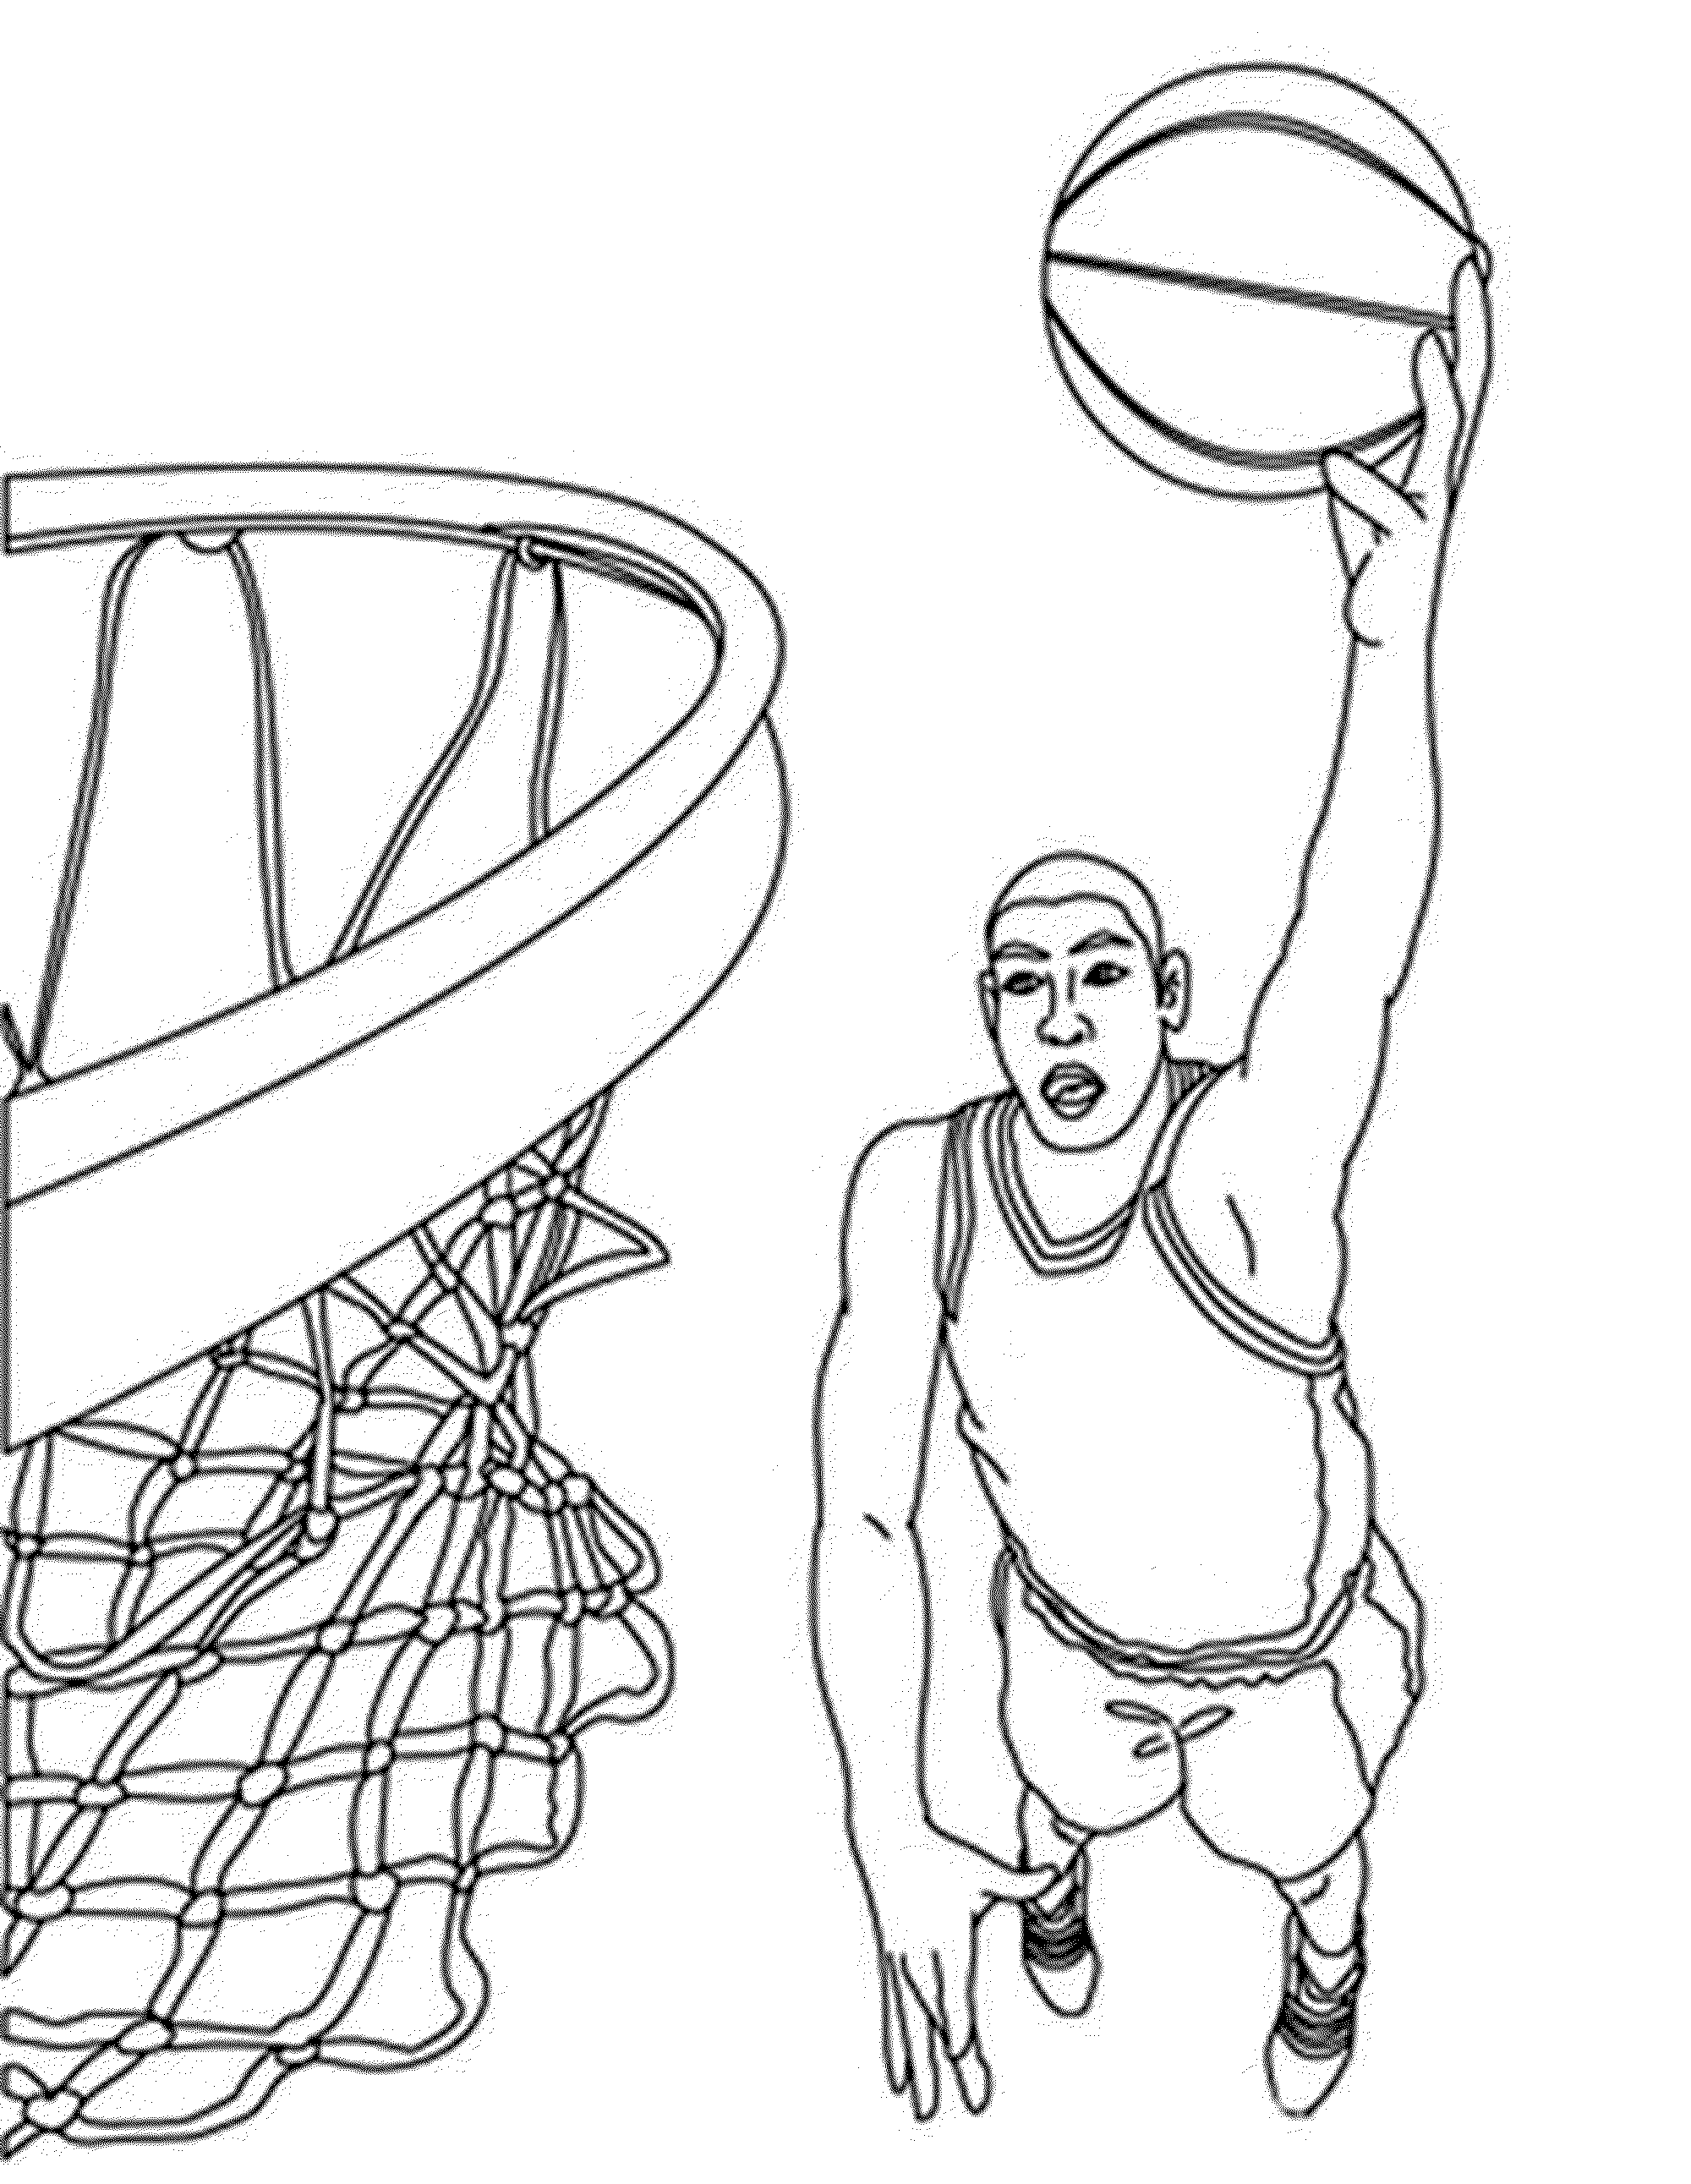 Print & Download Interesting Basketball Coloring Pages